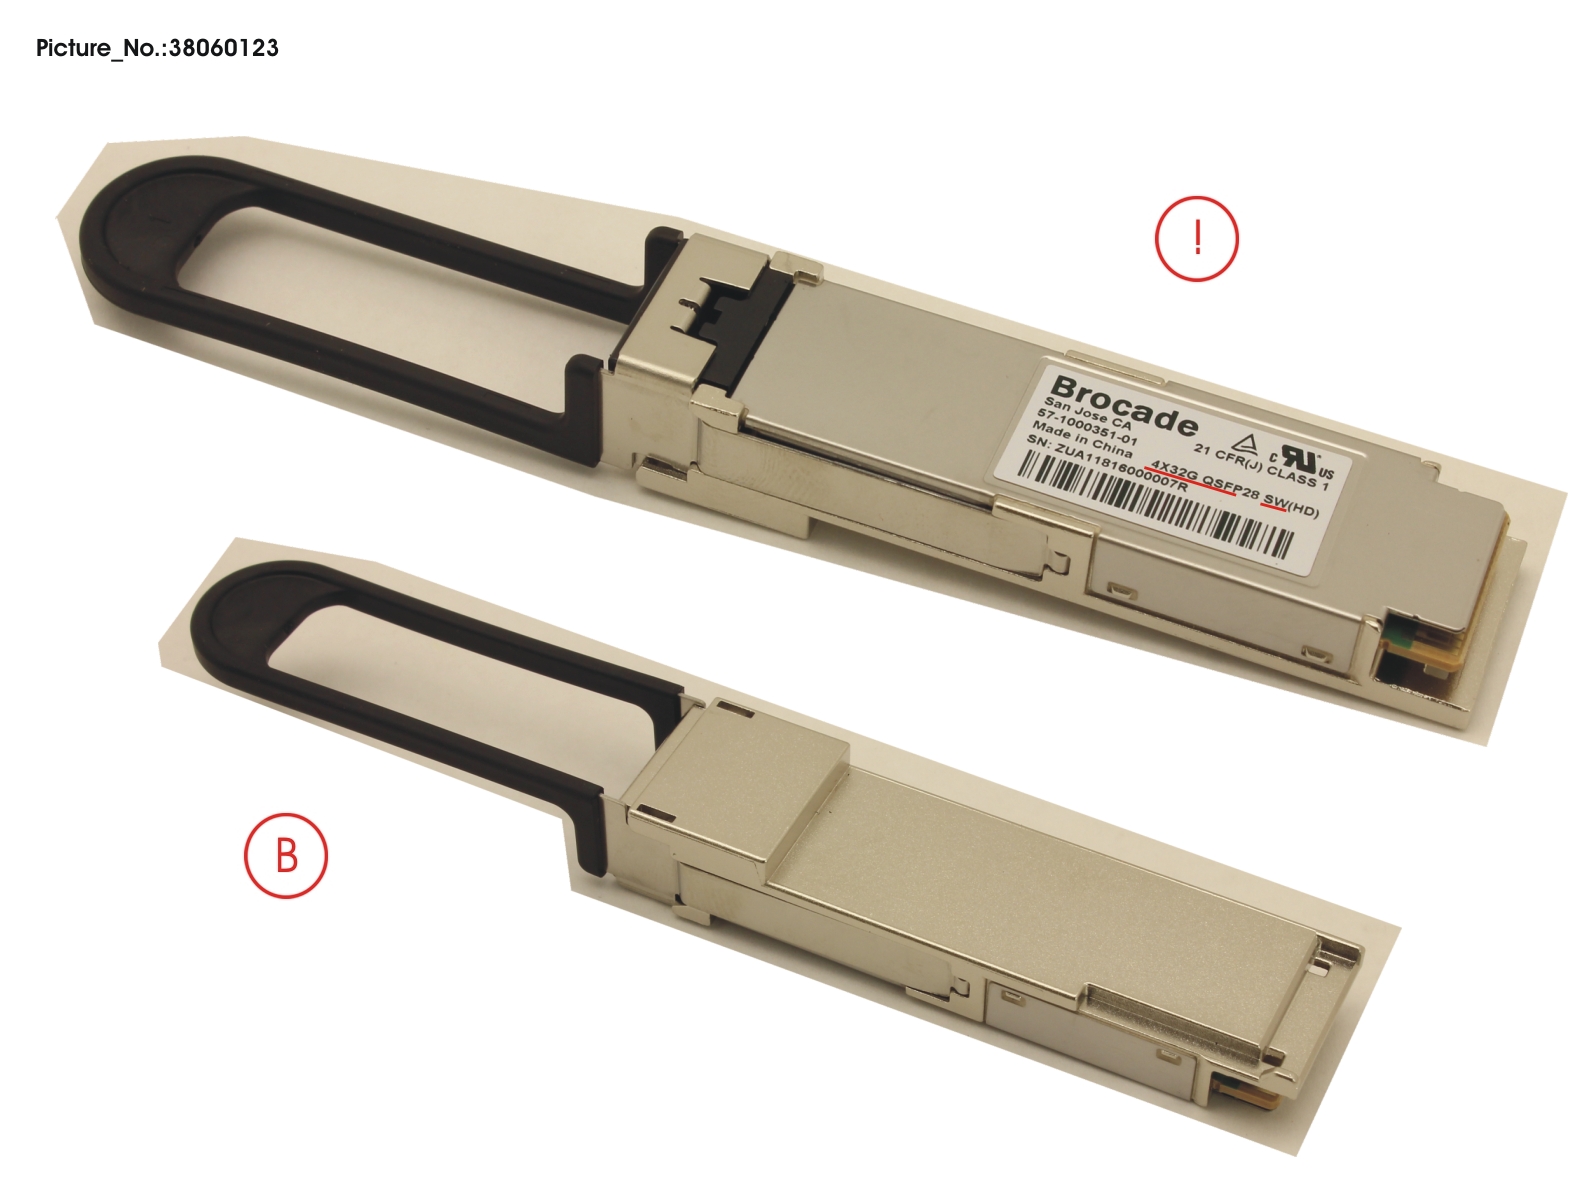 QSFP,SWL,4X32G WITH BREAKOUT,1-PK